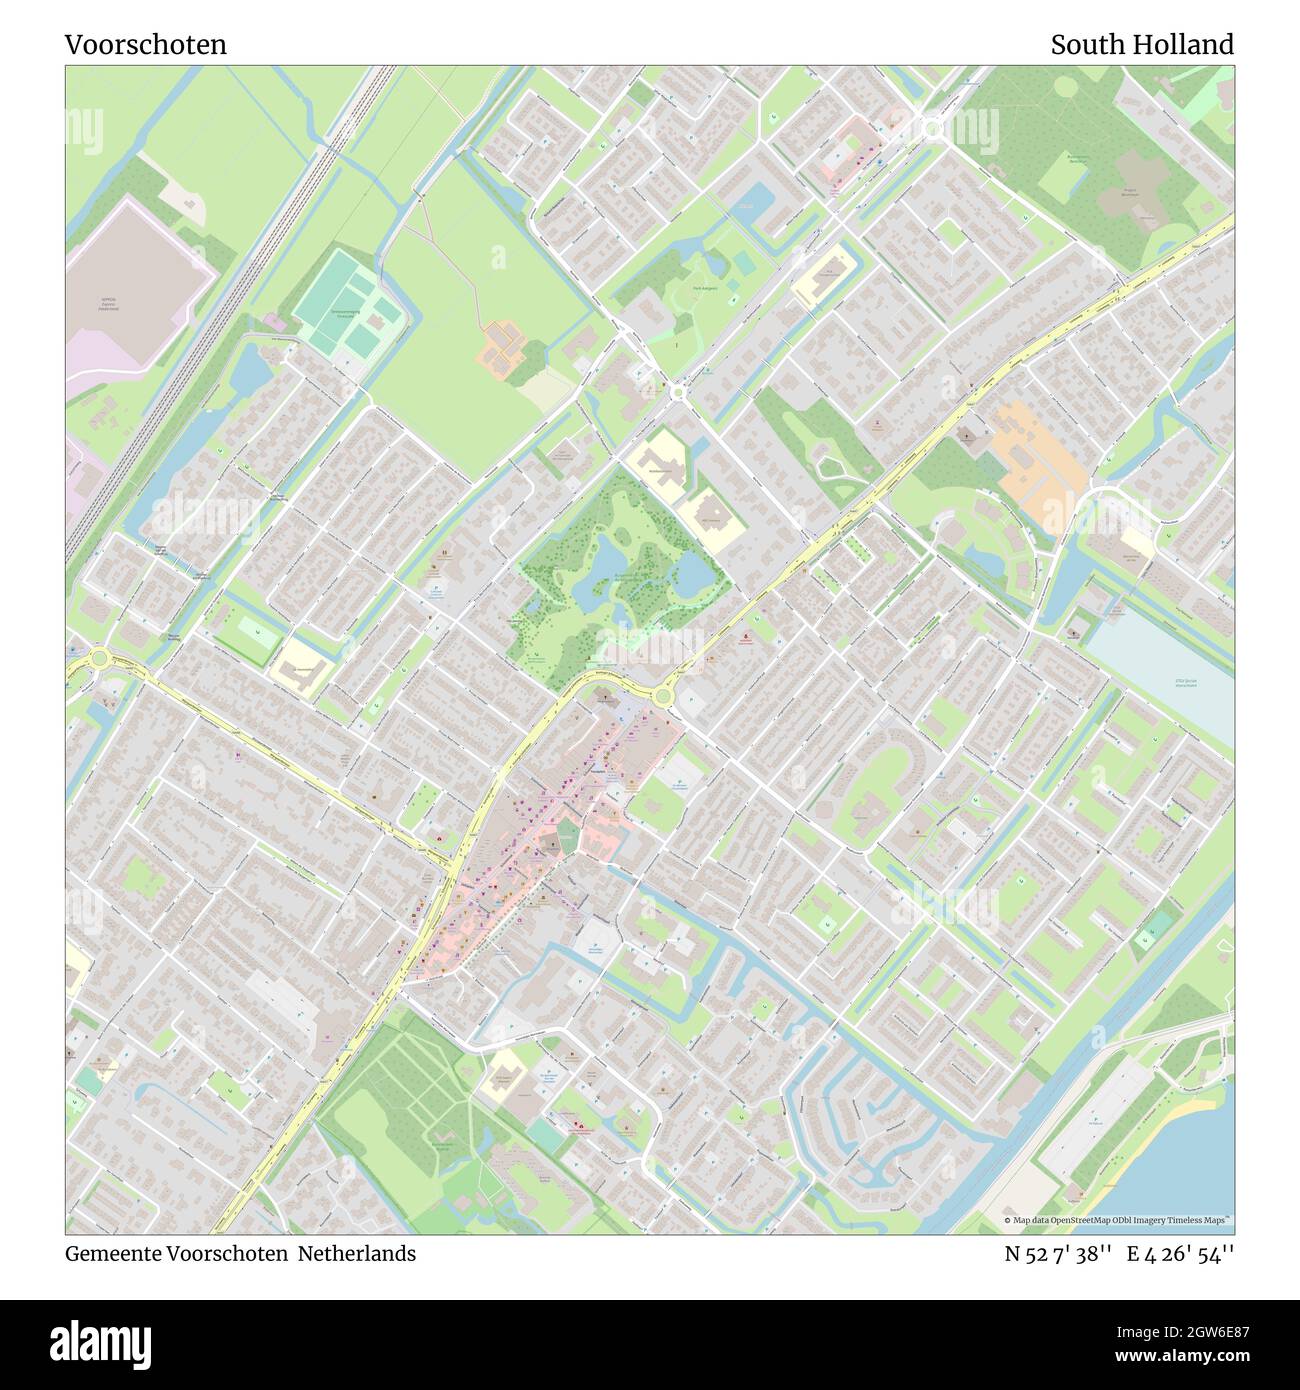 Voorschoten, Gemeente Voorschoten, Netherlands, South Holland, N 52 7' 38'', E 4 26' 54'', map, Timeless Map published in 2021. Travelers, explorers and adventurers like Florence Nightingale, David Livingstone, Ernest Shackleton, Lewis and Clark and Sherlock Holmes relied on maps to plan travels to the world's most remote corners, Timeless Maps is mapping most locations on the globe, showing the achievement of great dreams Stock Photo